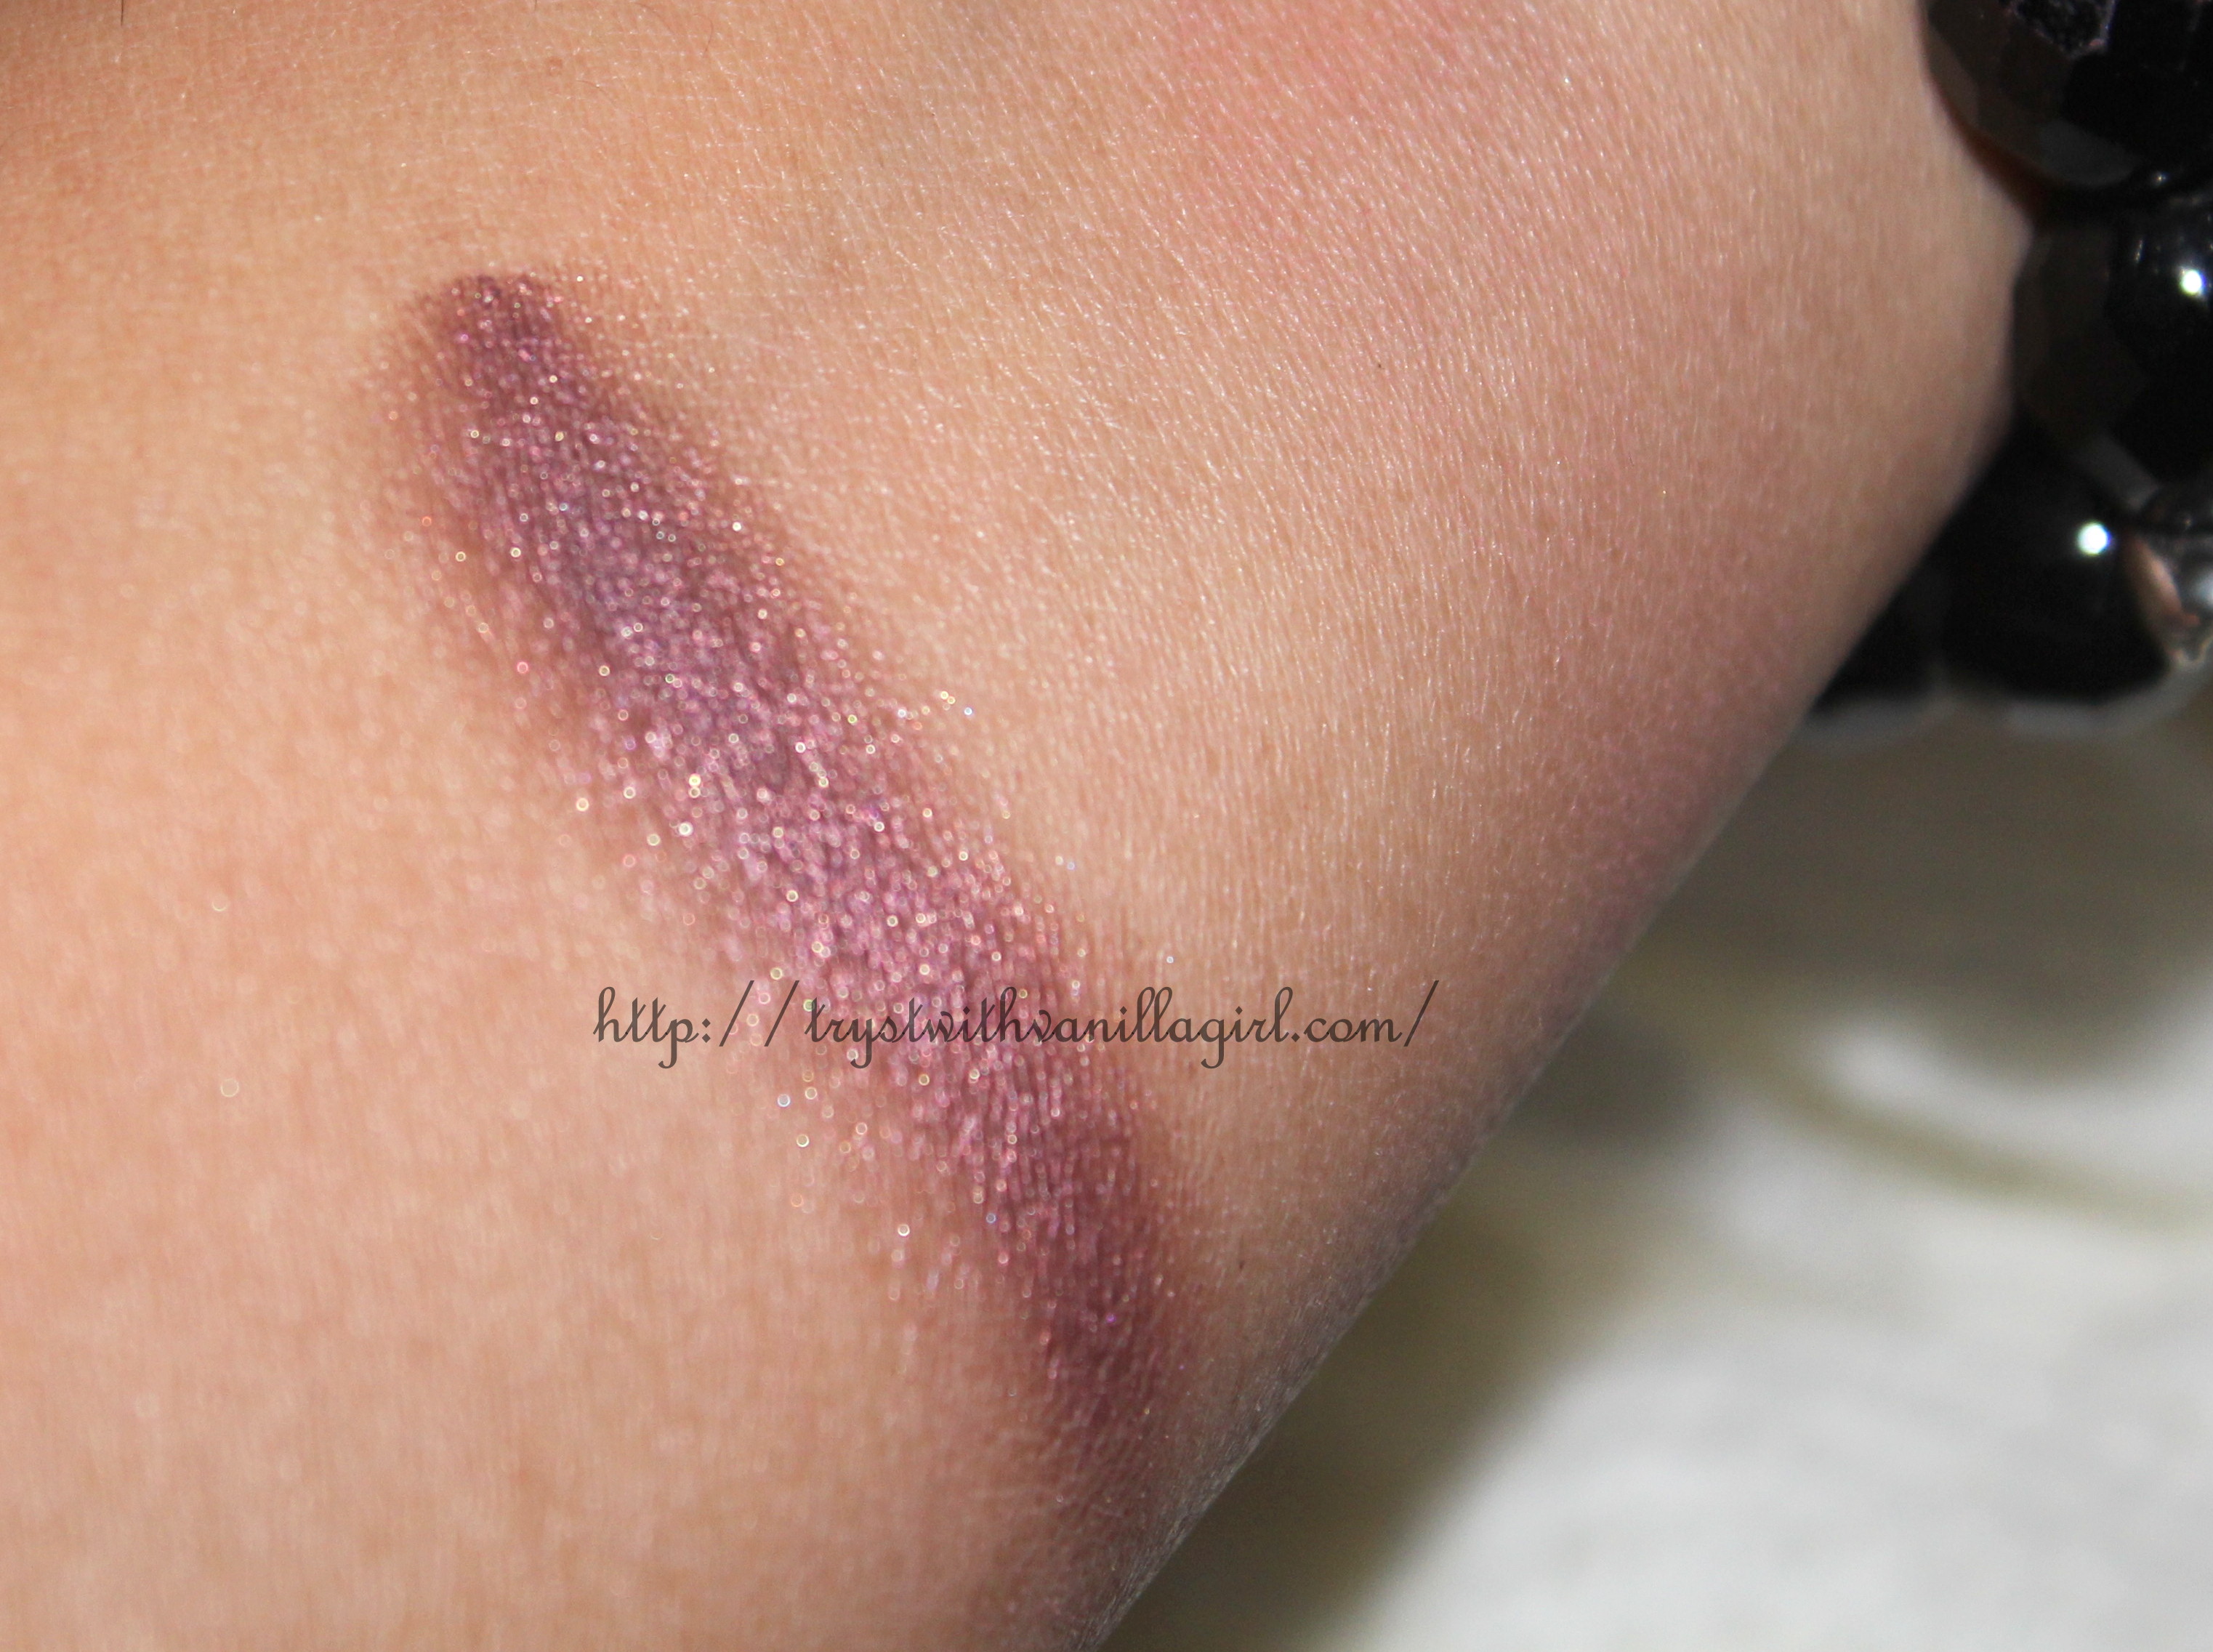 MAYBELLINE COLOR TATTOO EYE SHADOW POMEGRANATE PUNK Review,Swatch,Photos